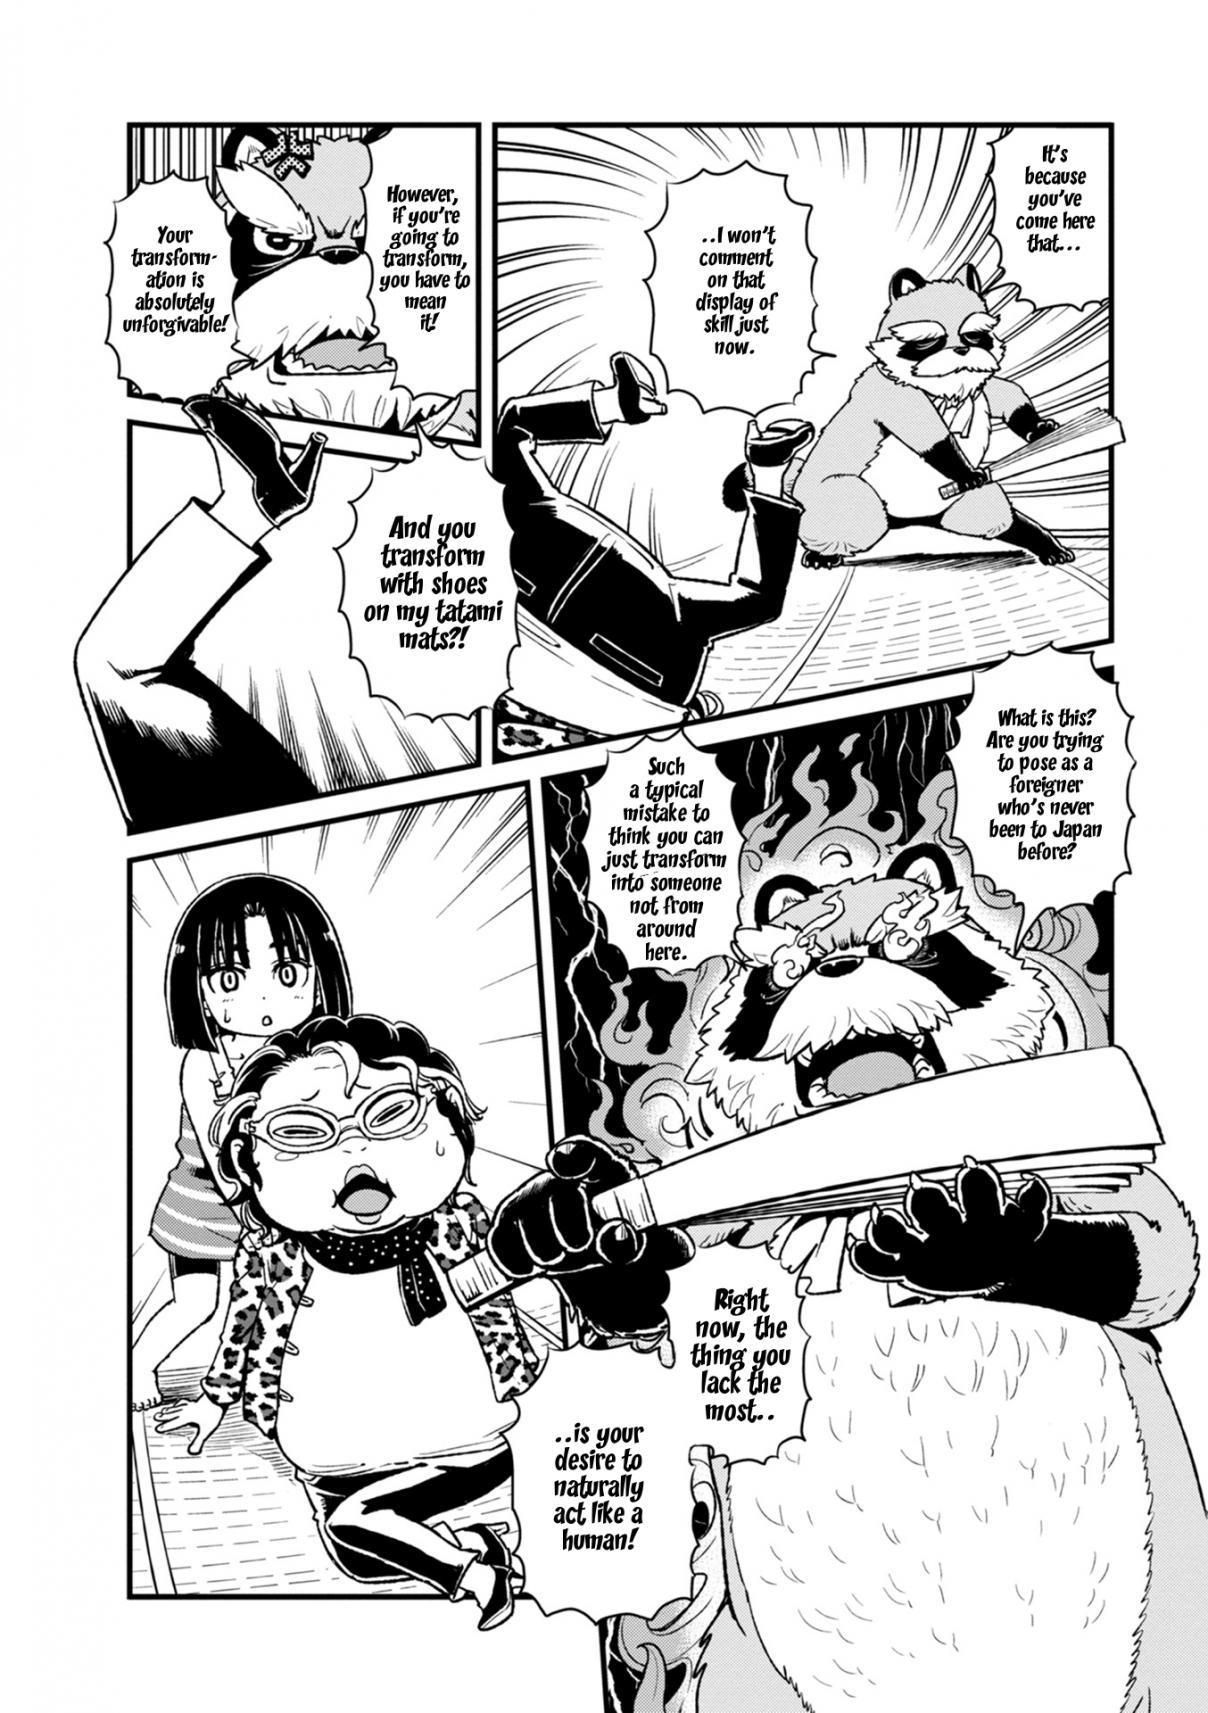 Neko Musume Michikusa Nikki Vol. 15 Ch. 88 Passing the Time at the Changing Dojo, Now and Then